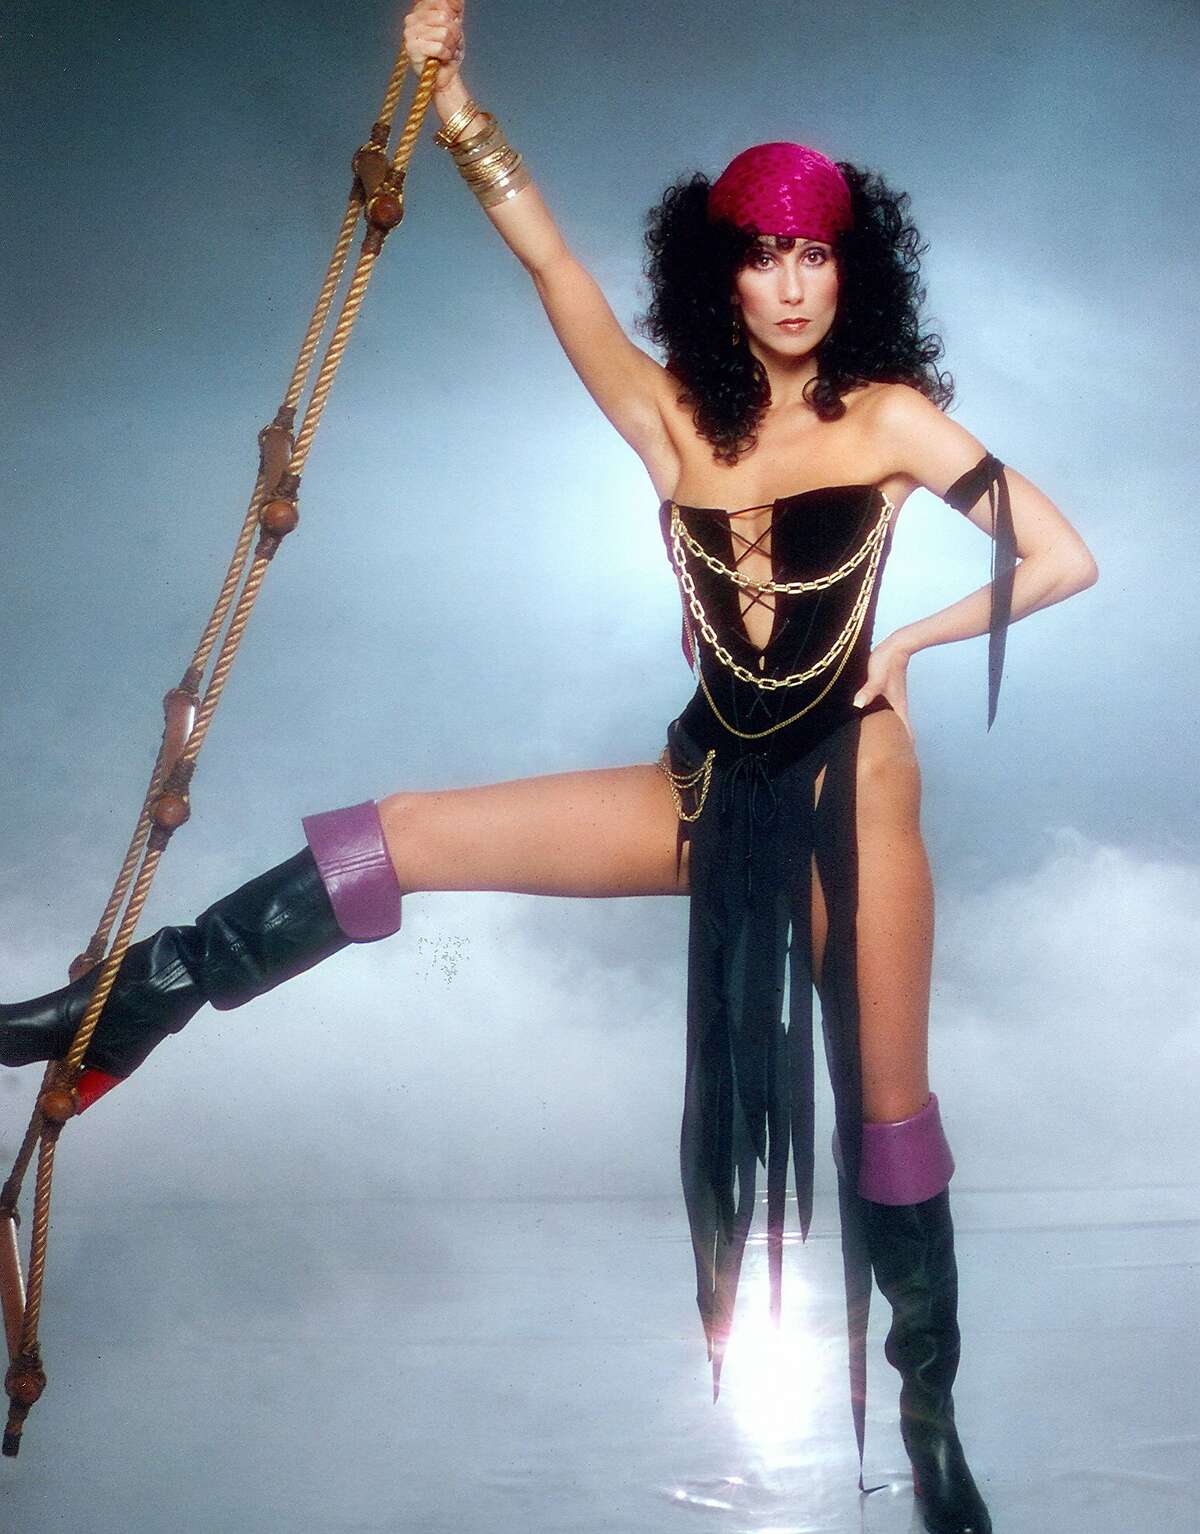 Cher poses for a fashion session in a Bob Mackie Creation on April 9, 1978 in Los Angeles.